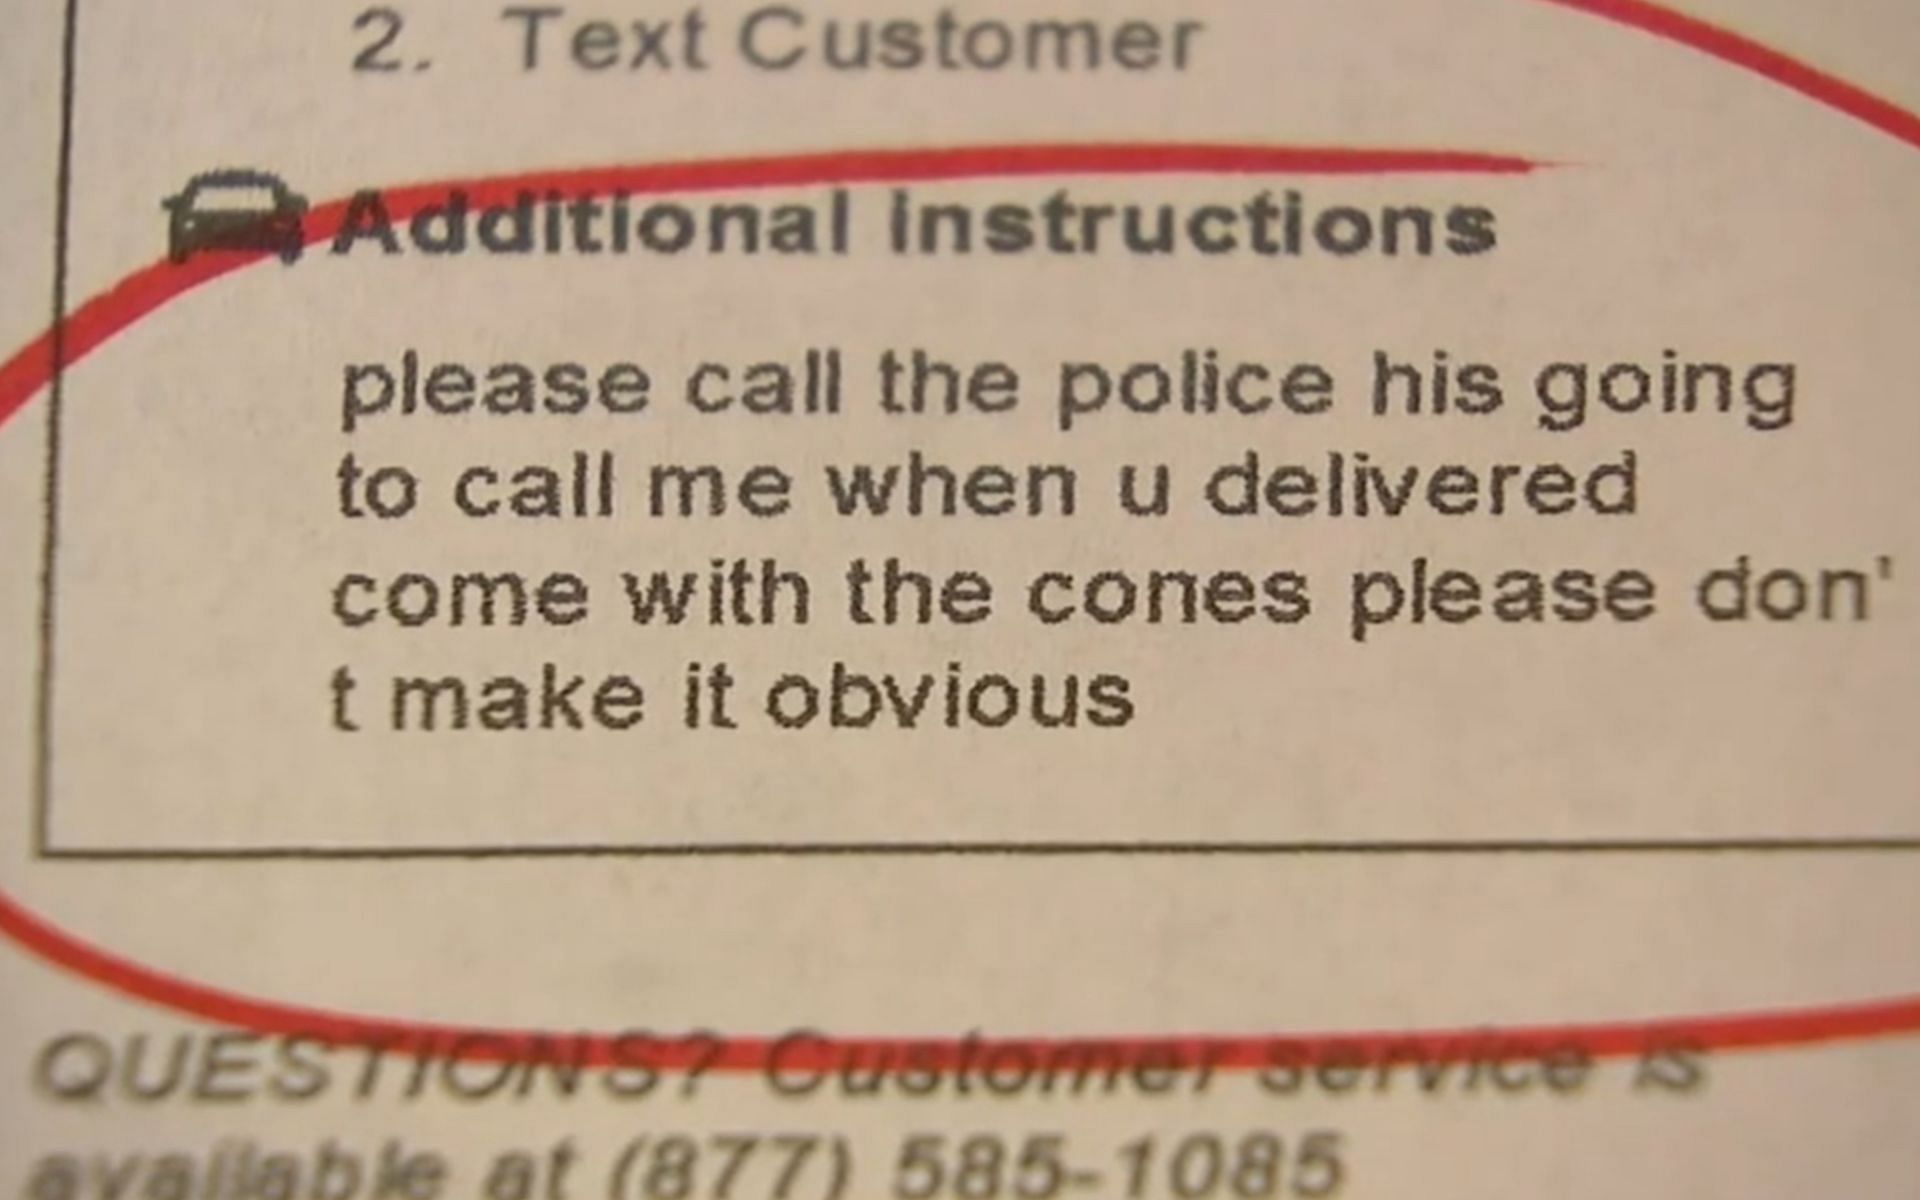 An NYC woman being held hostage contacted authorities through a Grubhub order (Image via WABC)